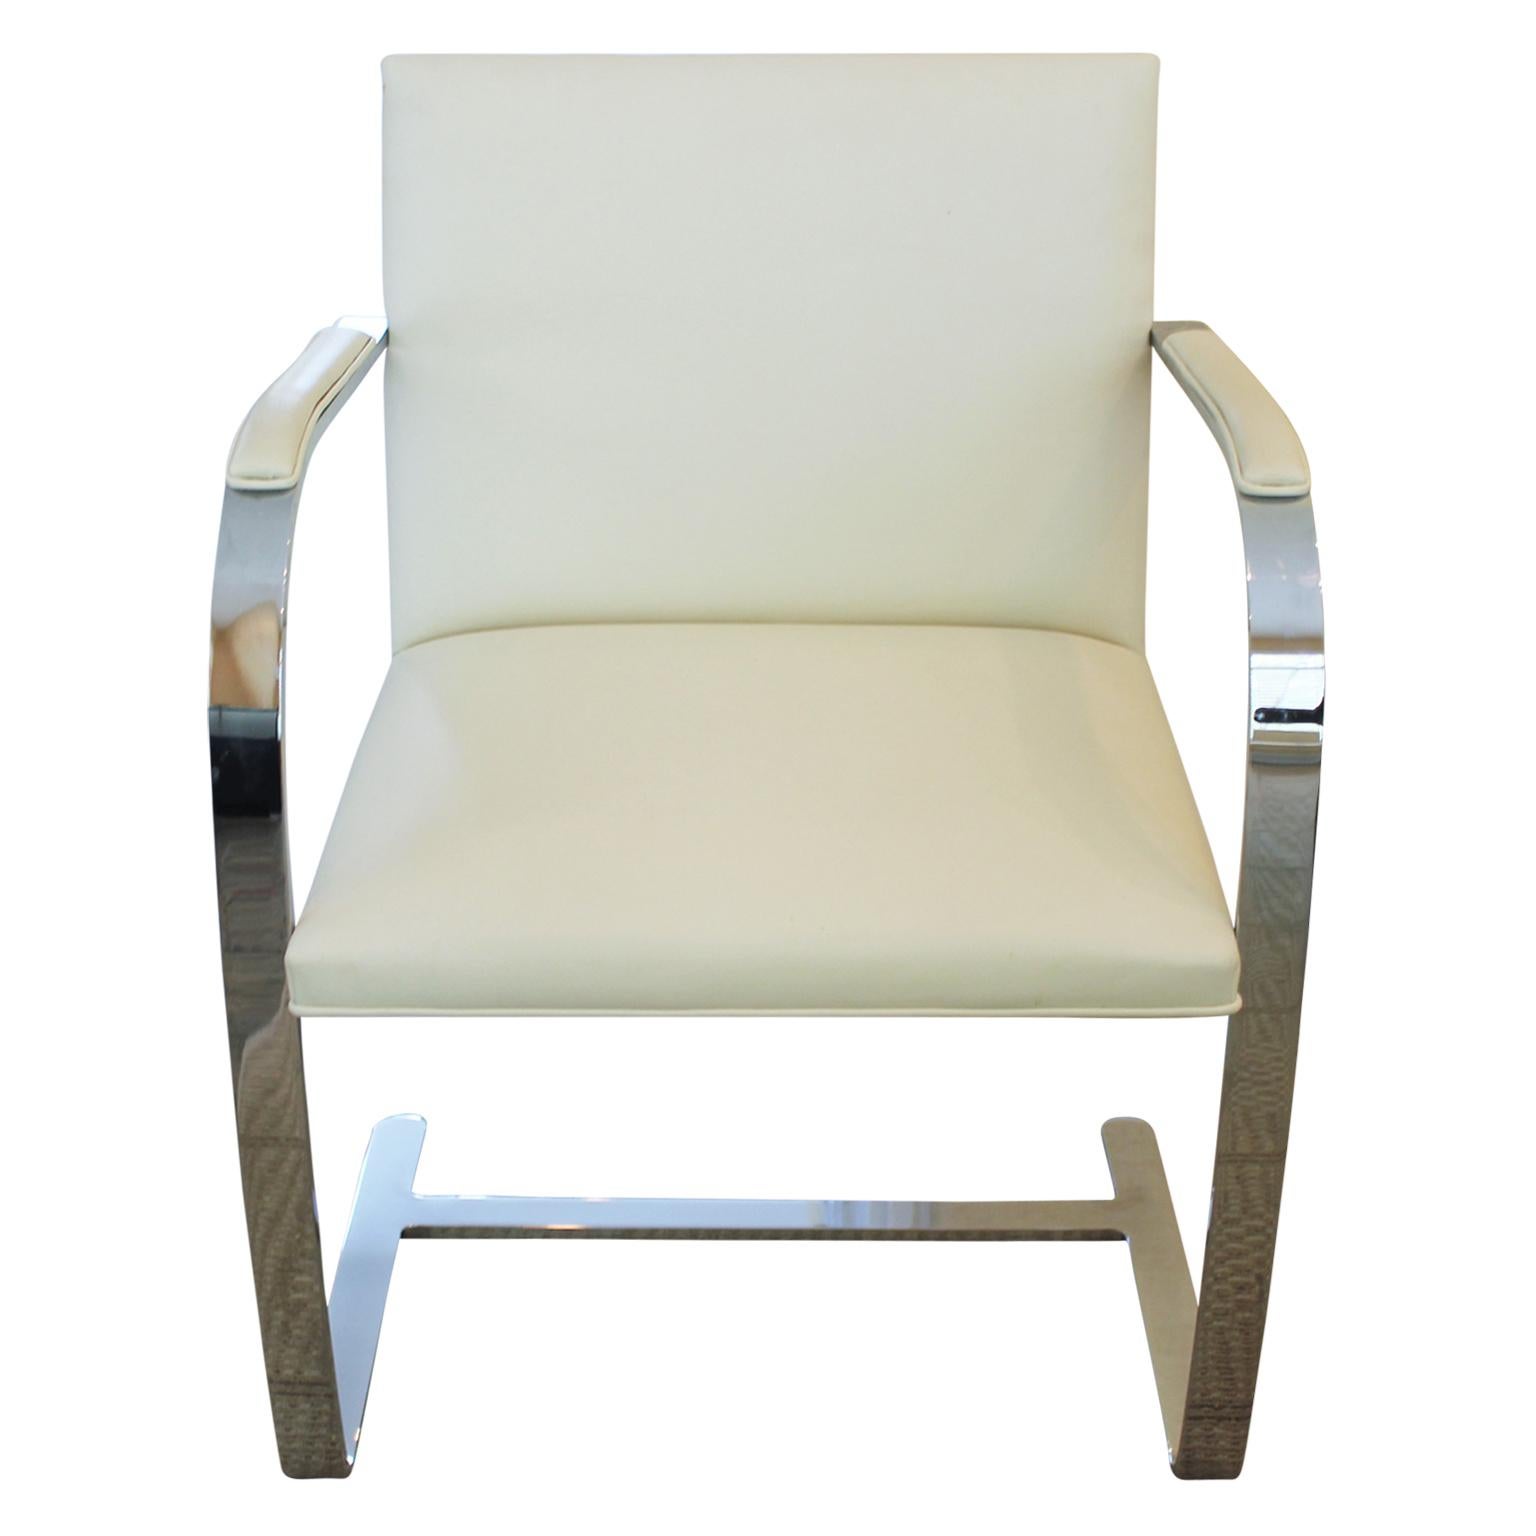 Chrome and white leather modern Knoll chairs with arms and leather accents on the arms. The leather has wear and they need to be reupholstered.